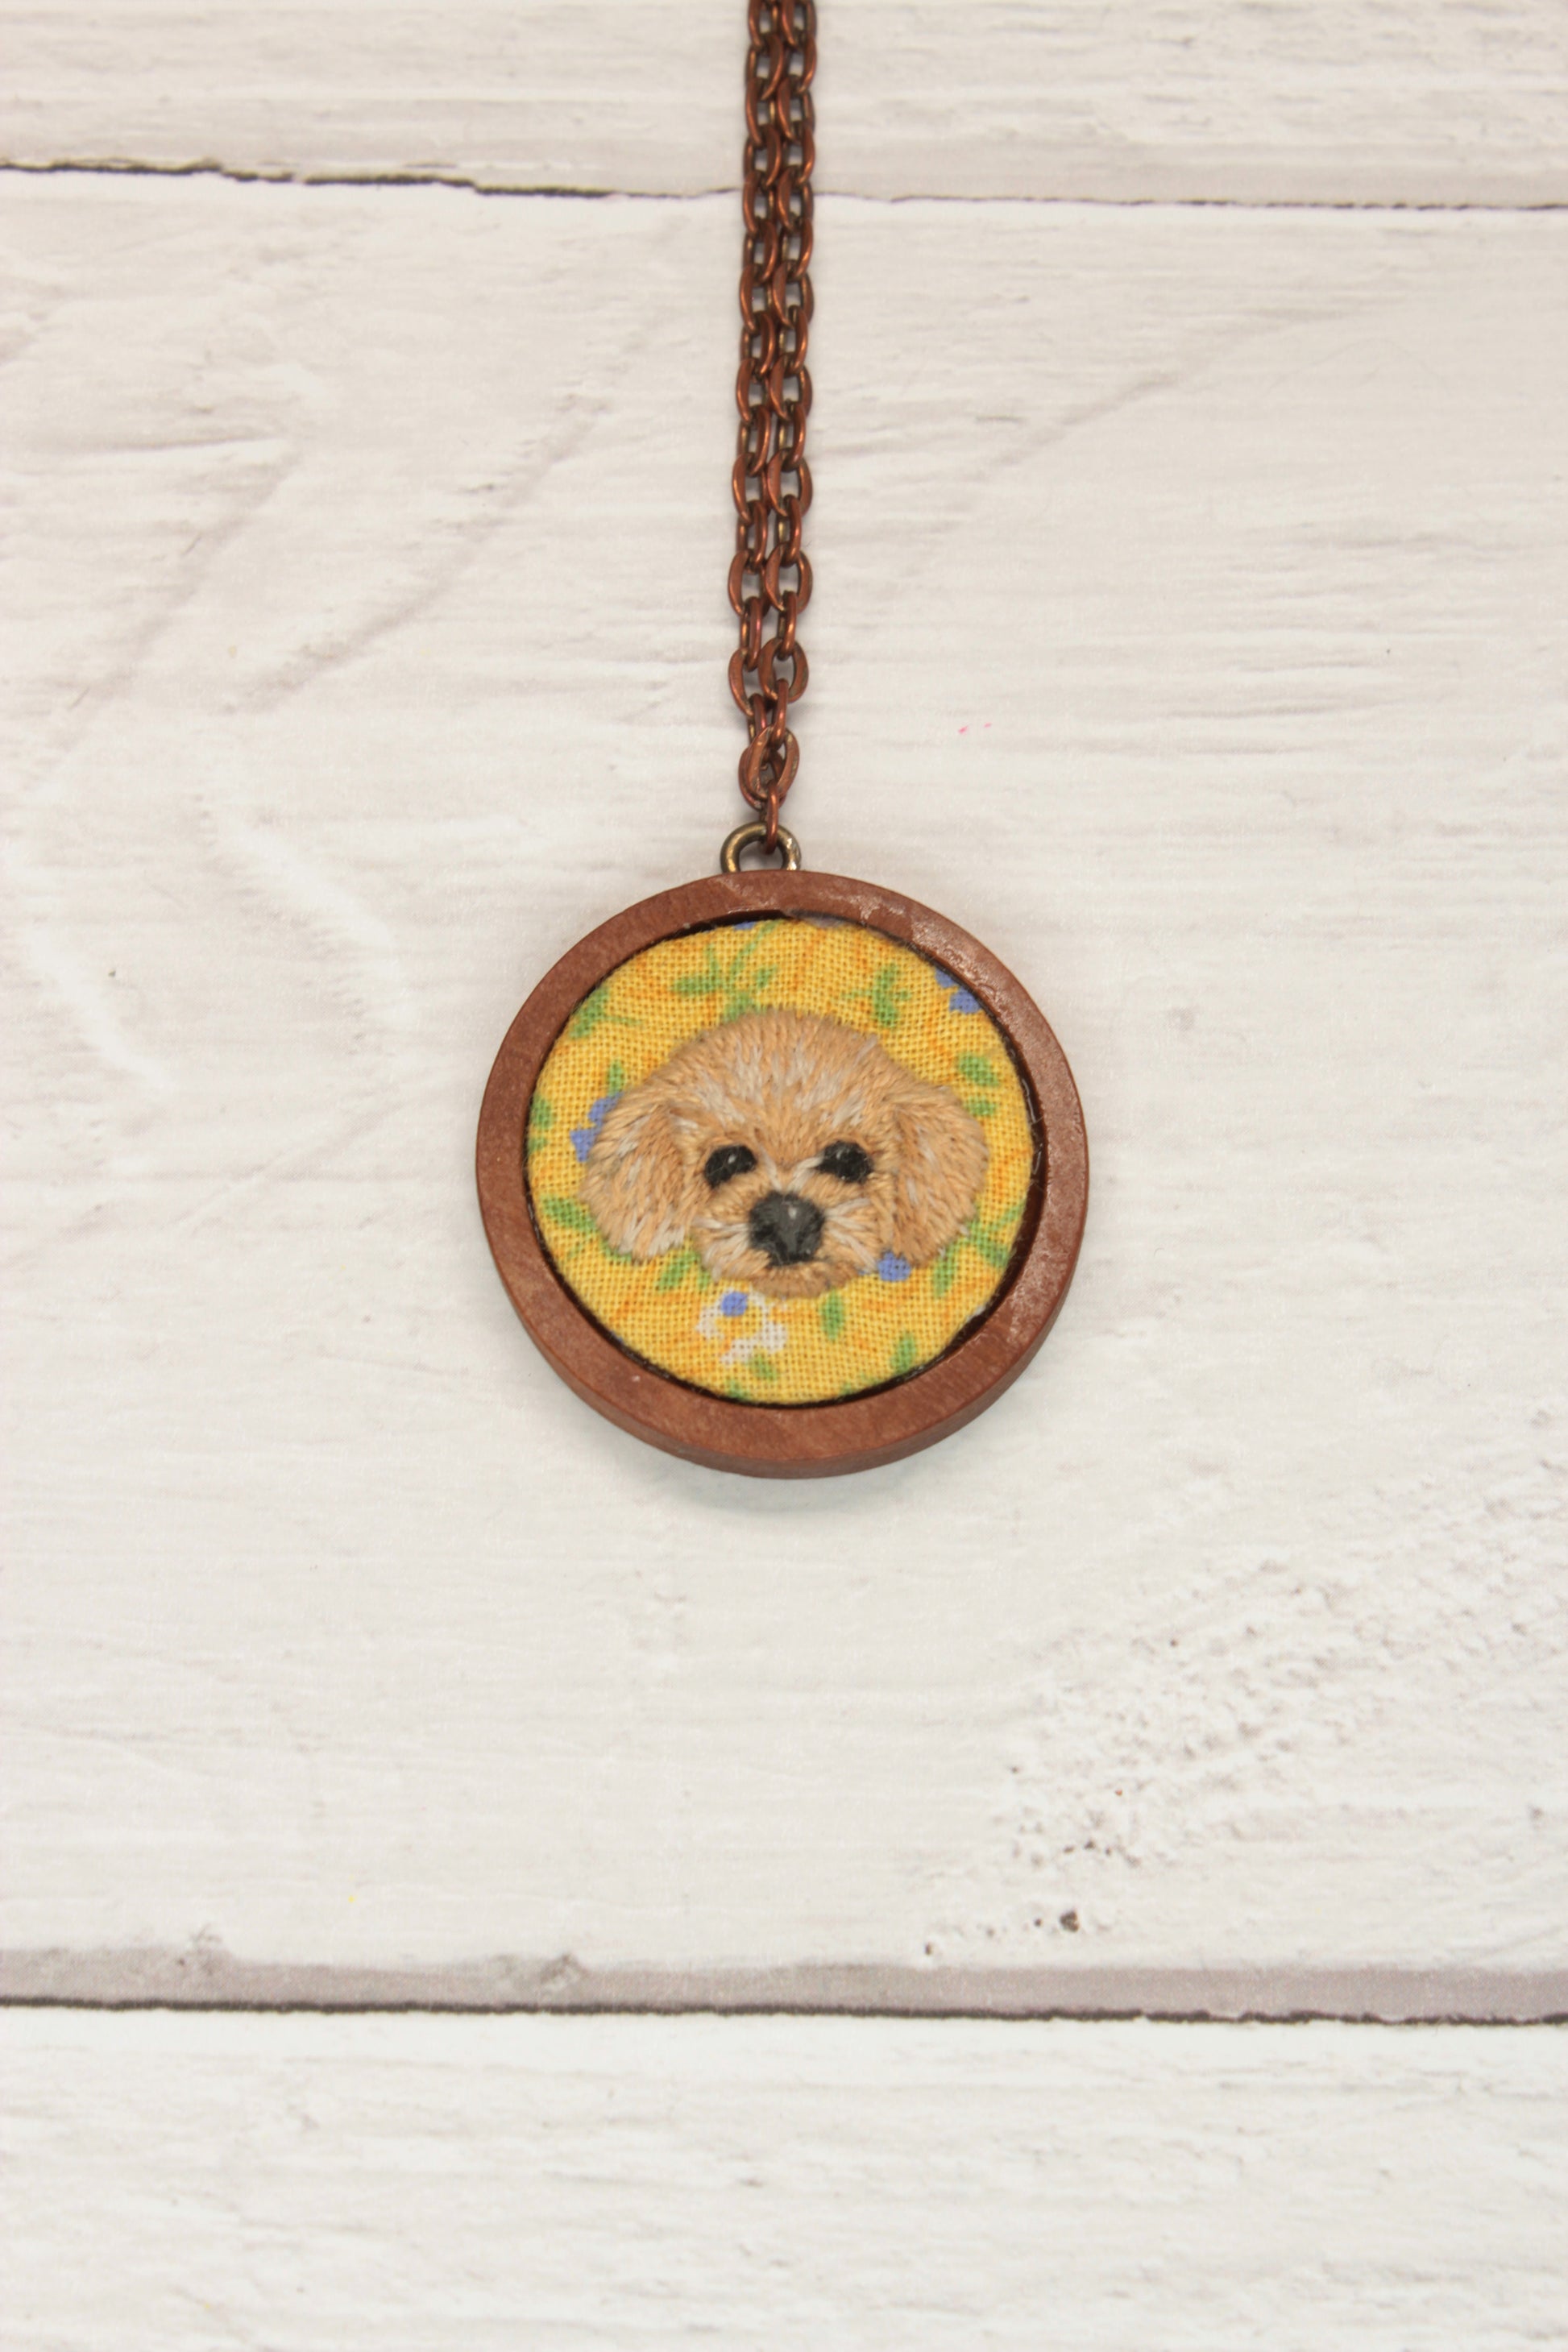 Embroidery Doodle Dog Necklace